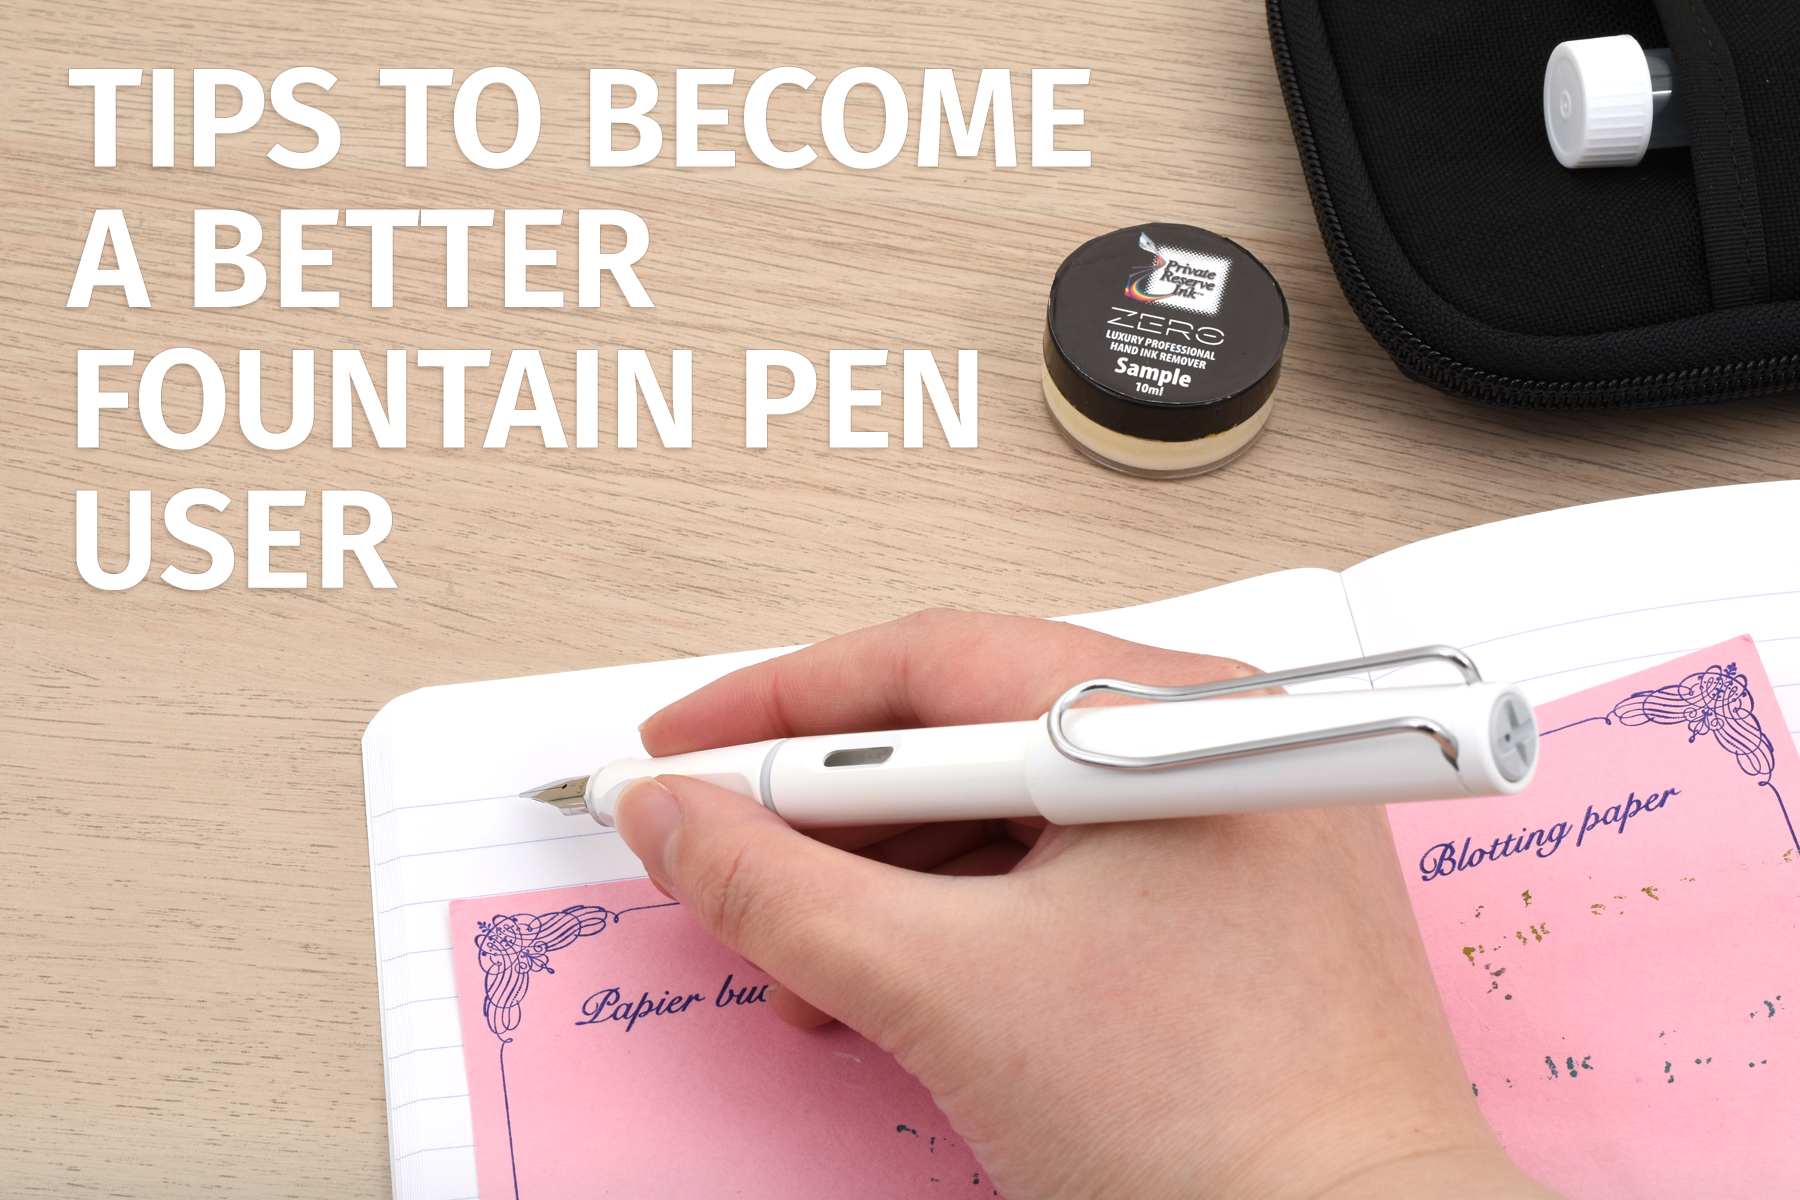 10 Tips to Become a Better Fountain Pen User